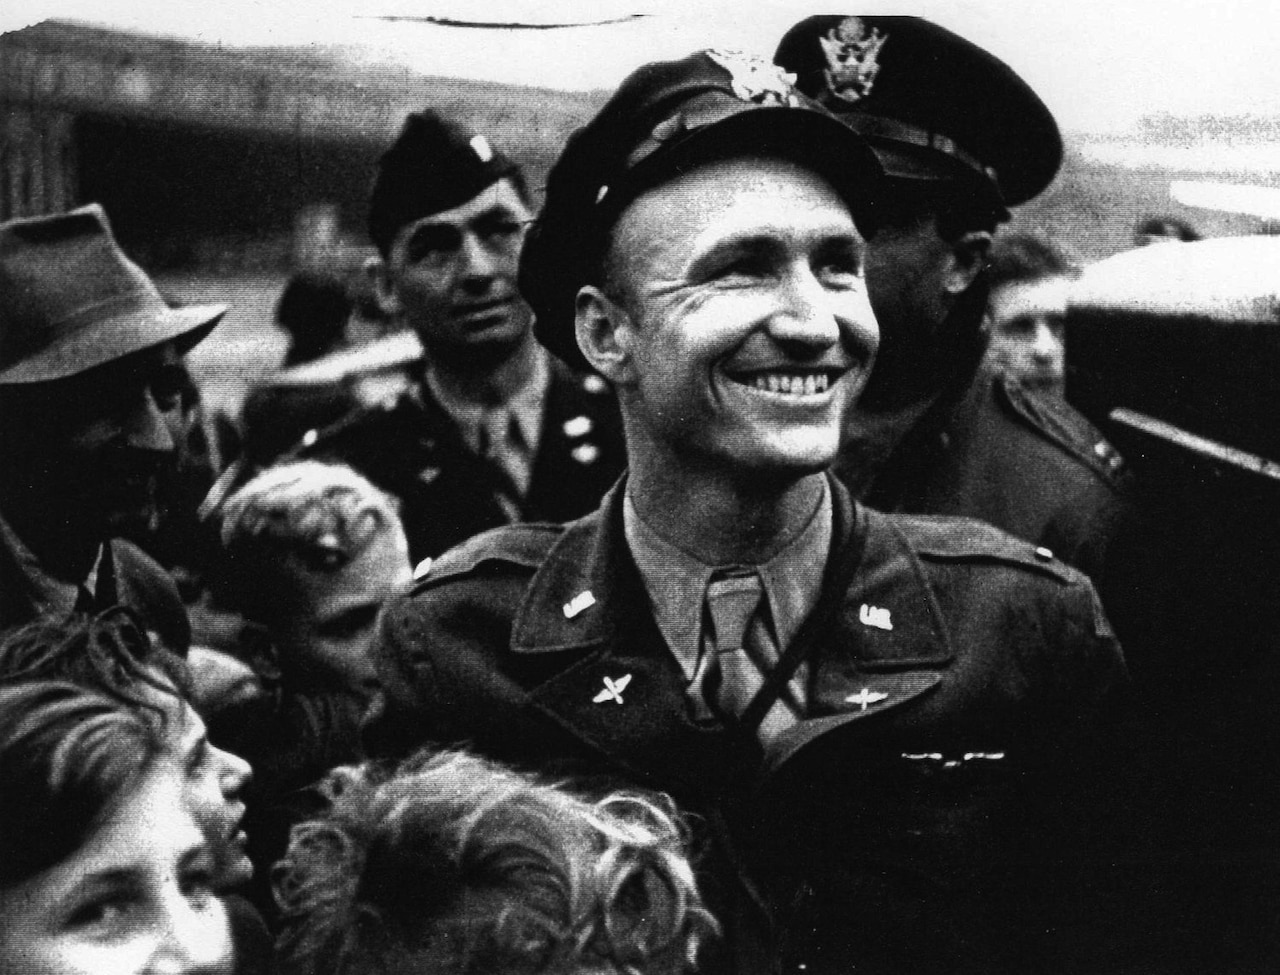 A pilot smiles while surrounded by children.